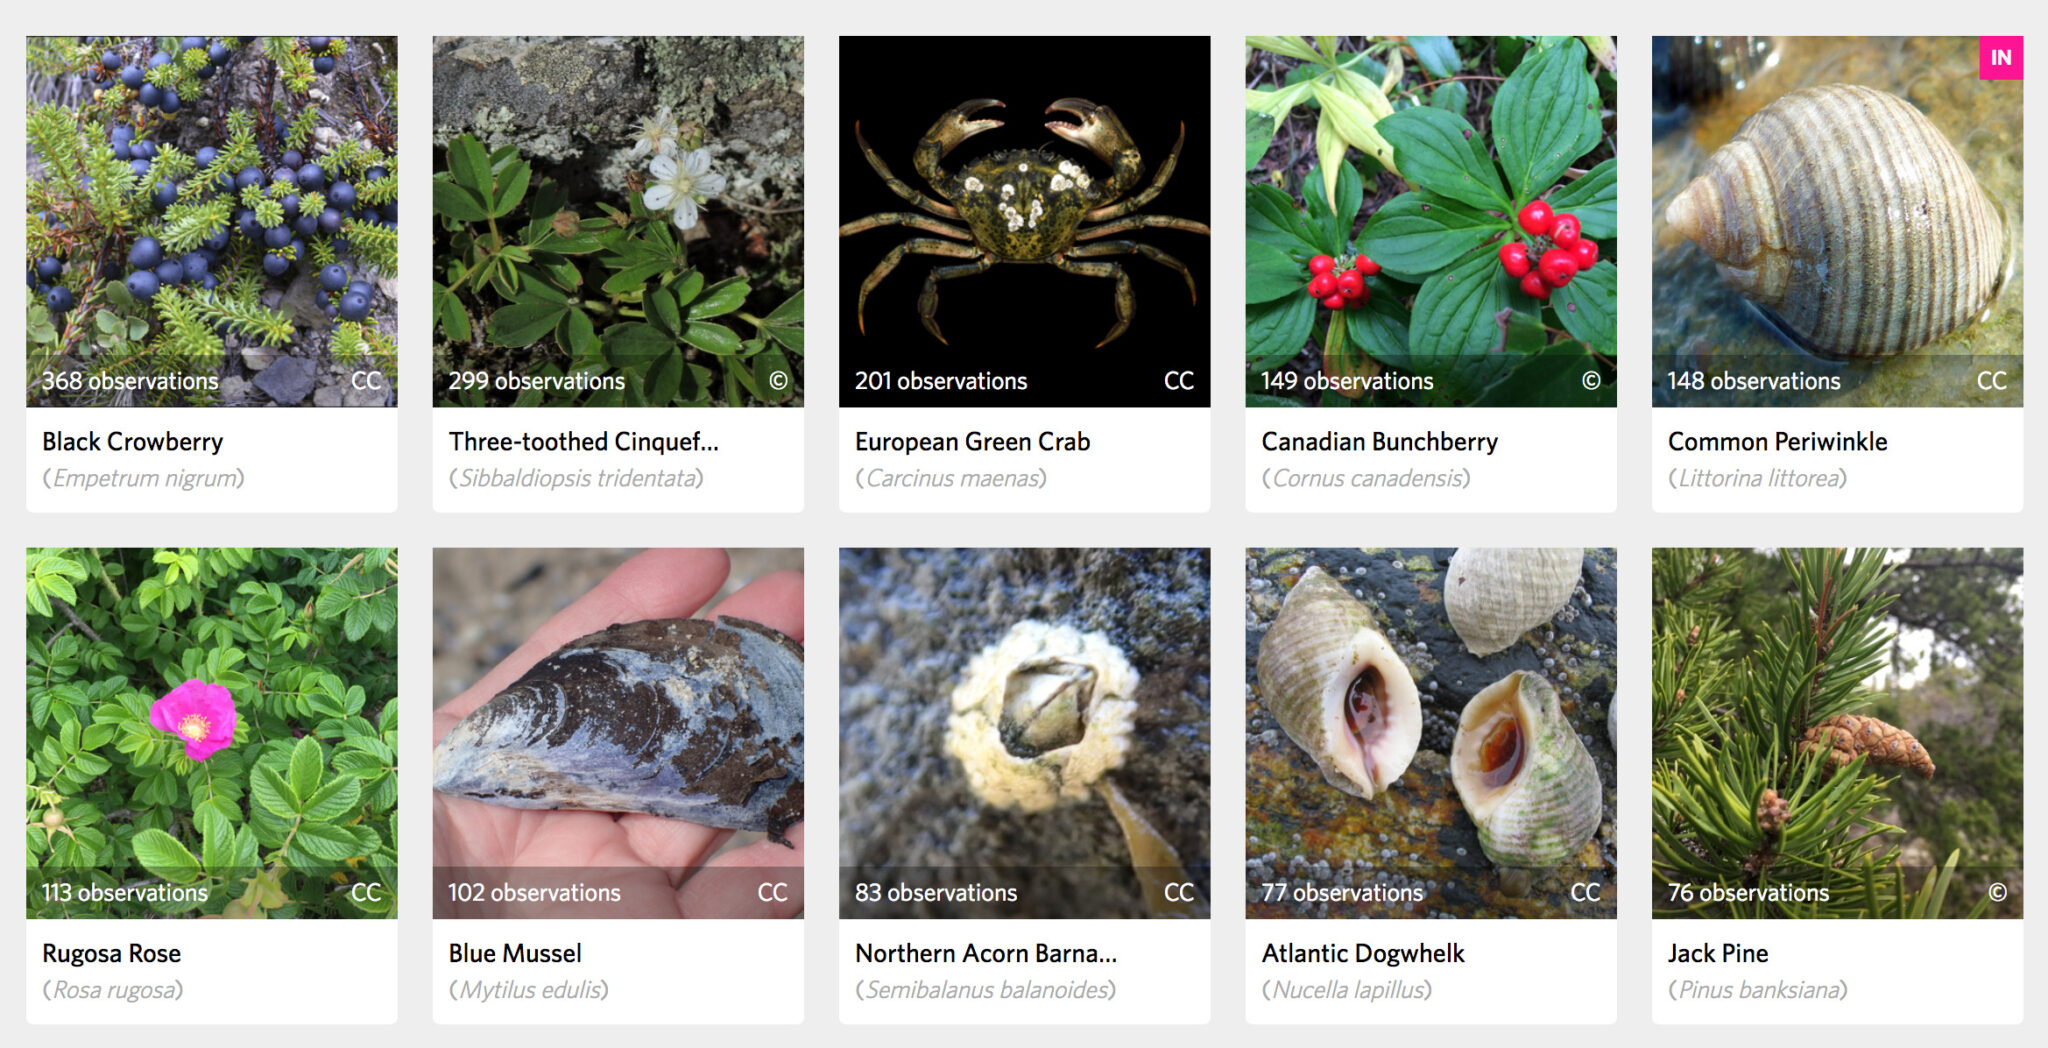 Screen capture from iNaturalist showing the ten most observed species.